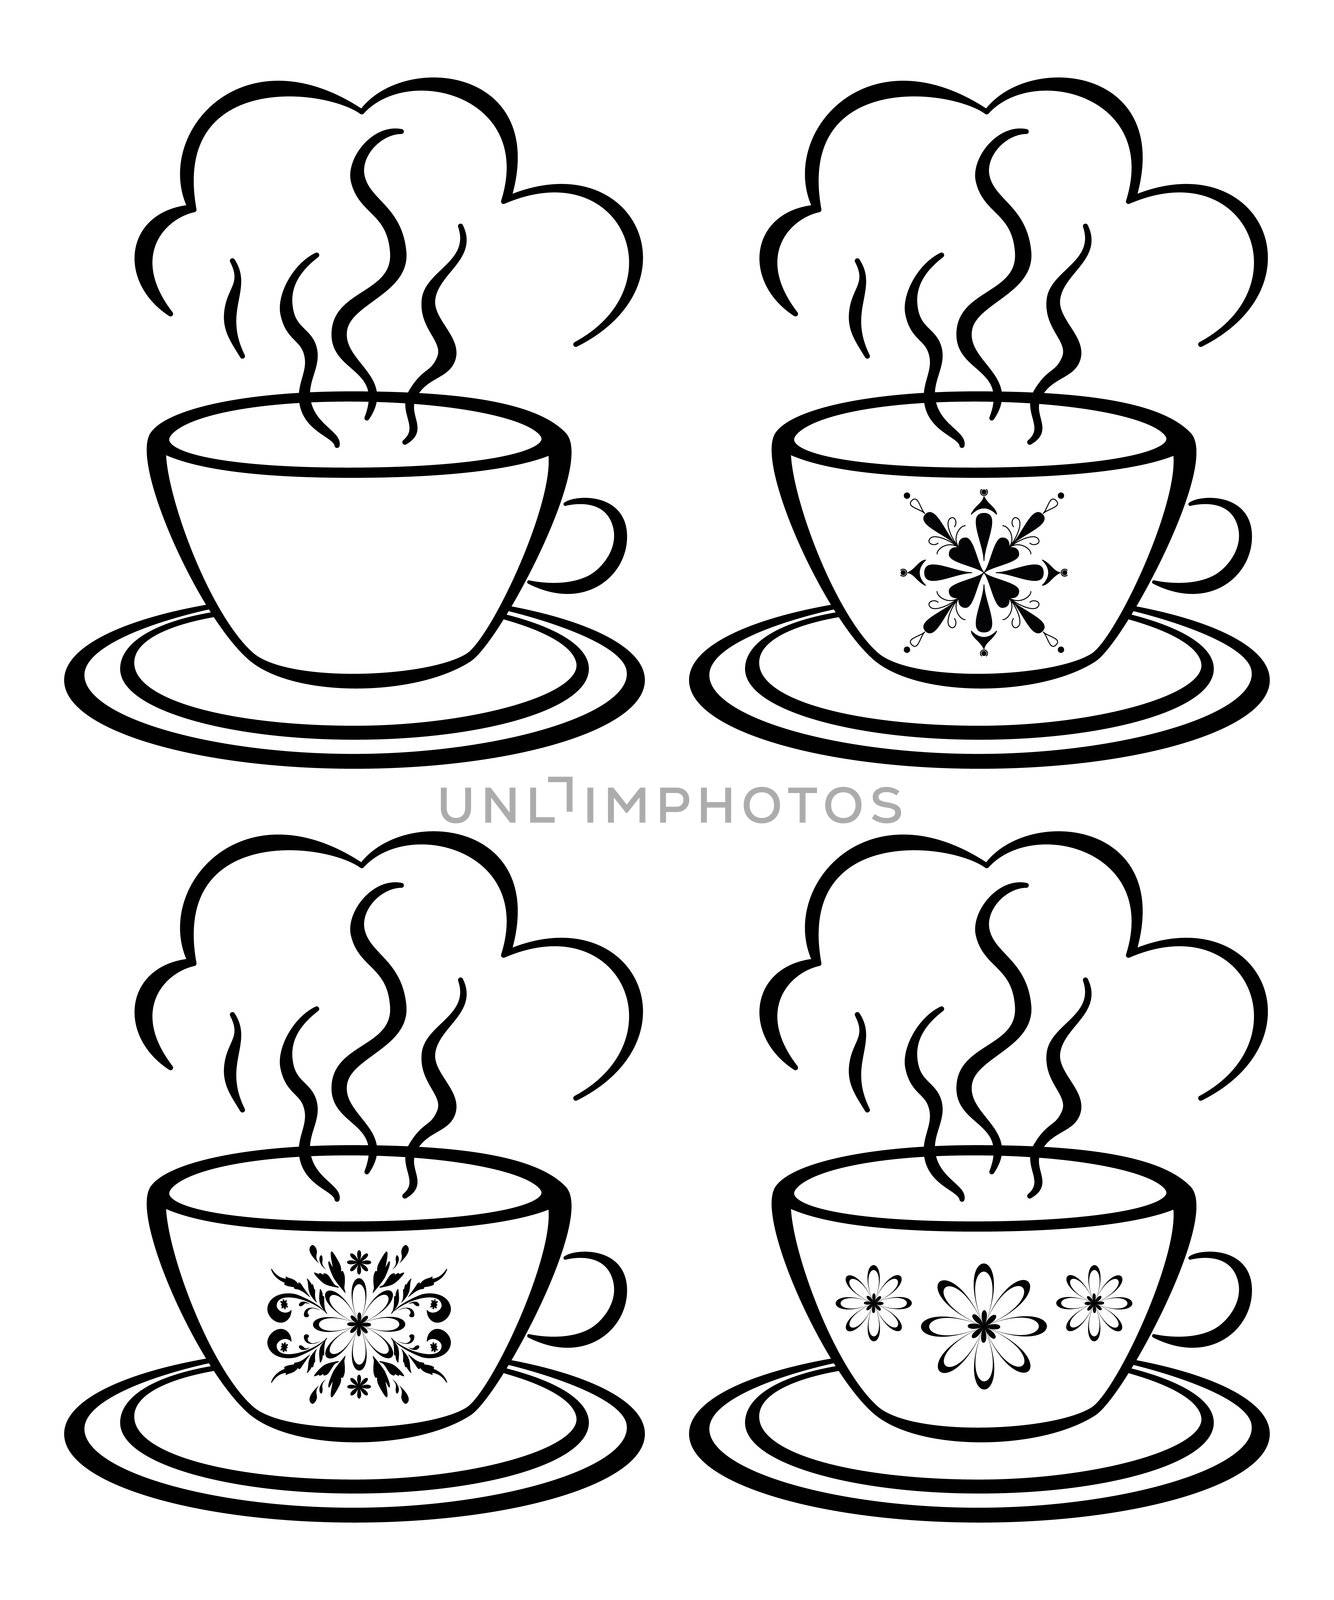 Cups with a floral pattern, outline by alexcoolok